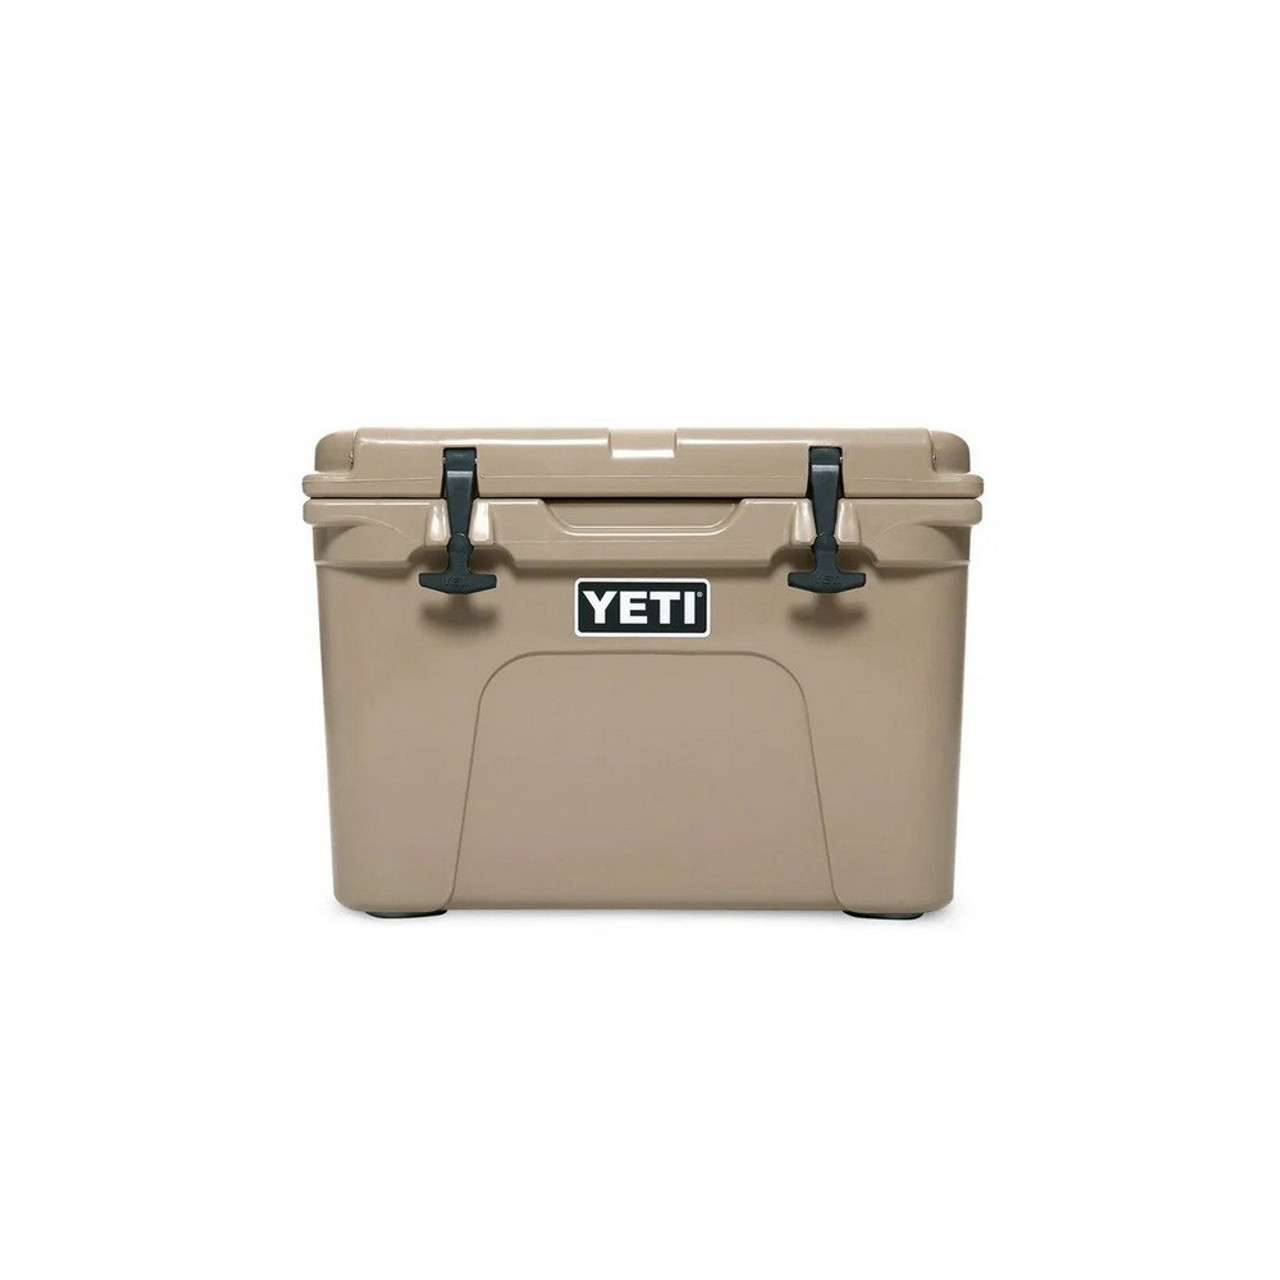 YETI Tundra 45 Cooler - Reef Blue for sale online